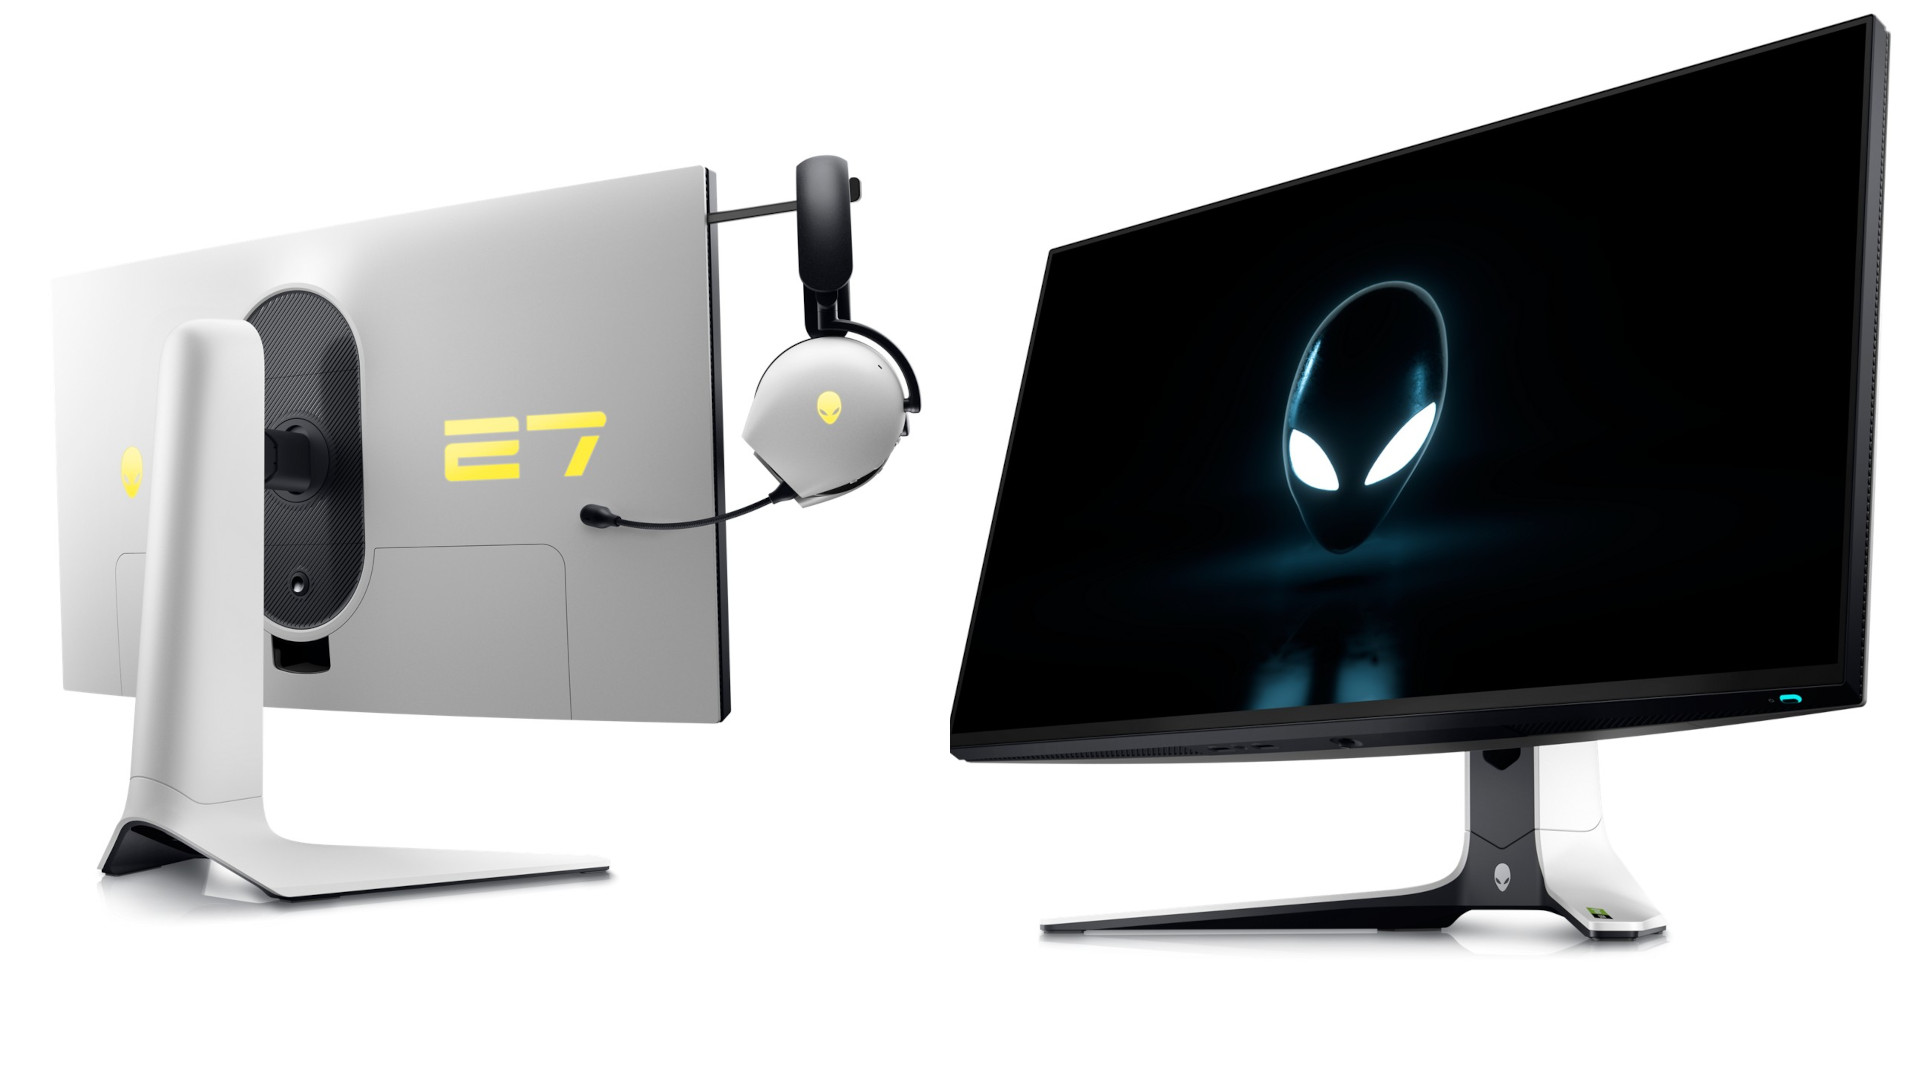 The Alienware AW2723DF gaming monitor rear (left) and front (right)